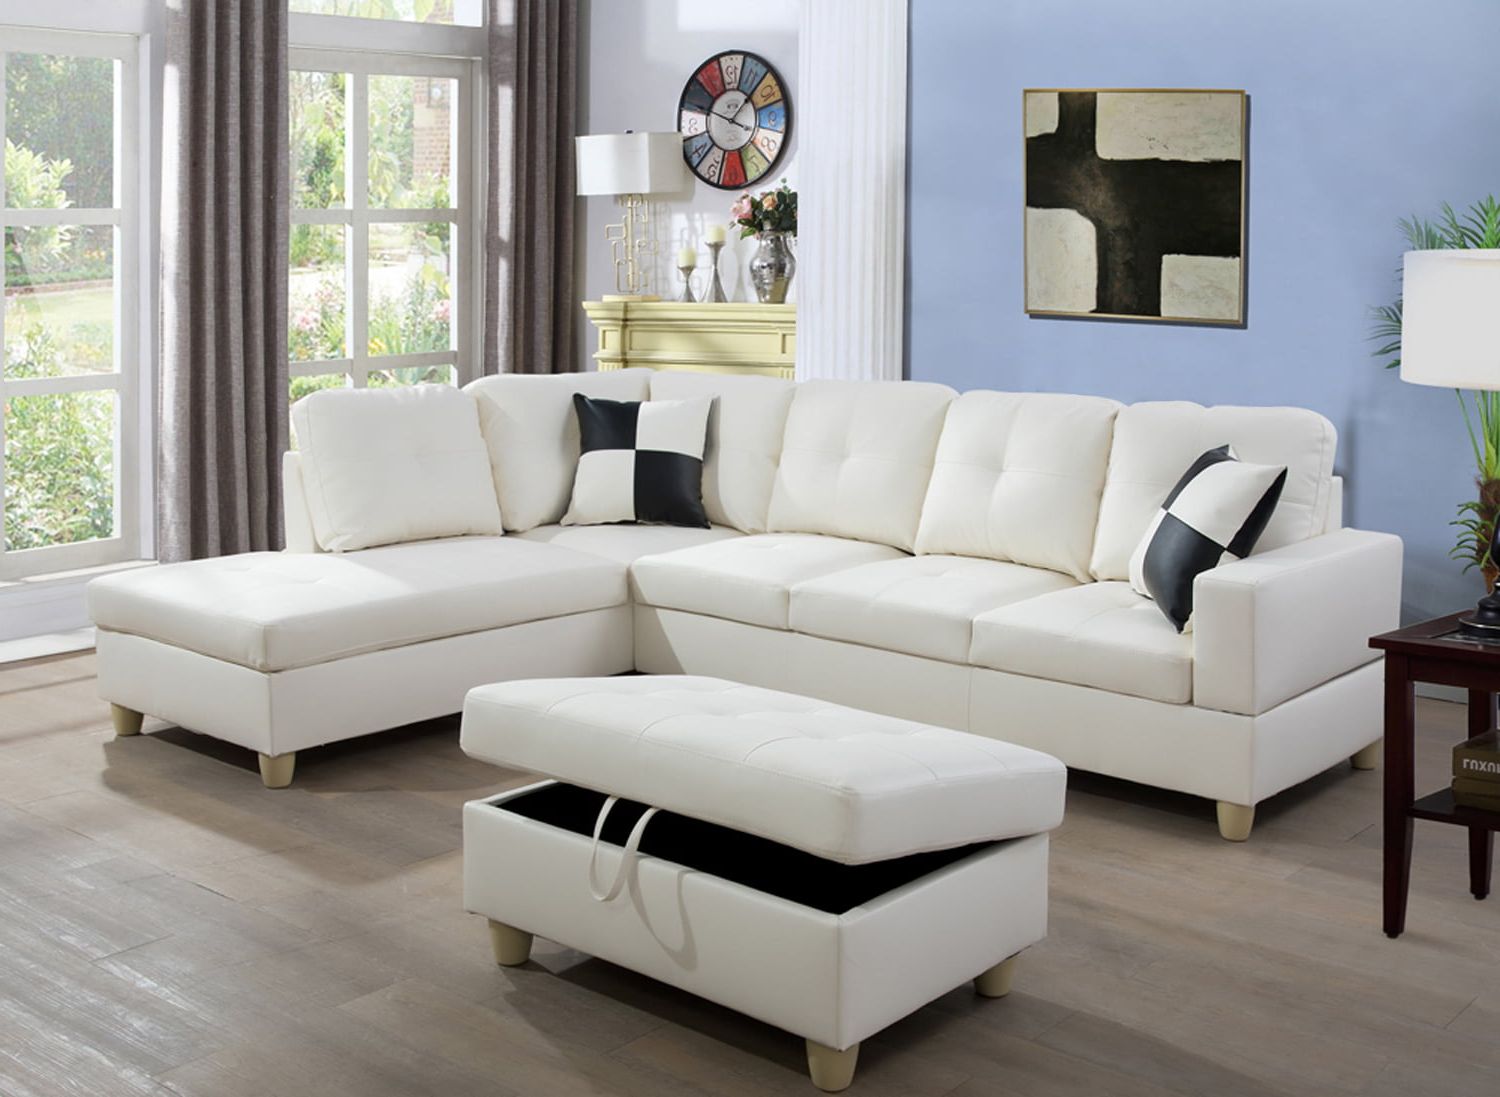 Ainehome Faux Leather Sectional Set, Living Room L Shaped Modern Sofa Within Sofas With Ottomans (Gallery 7 of 20)